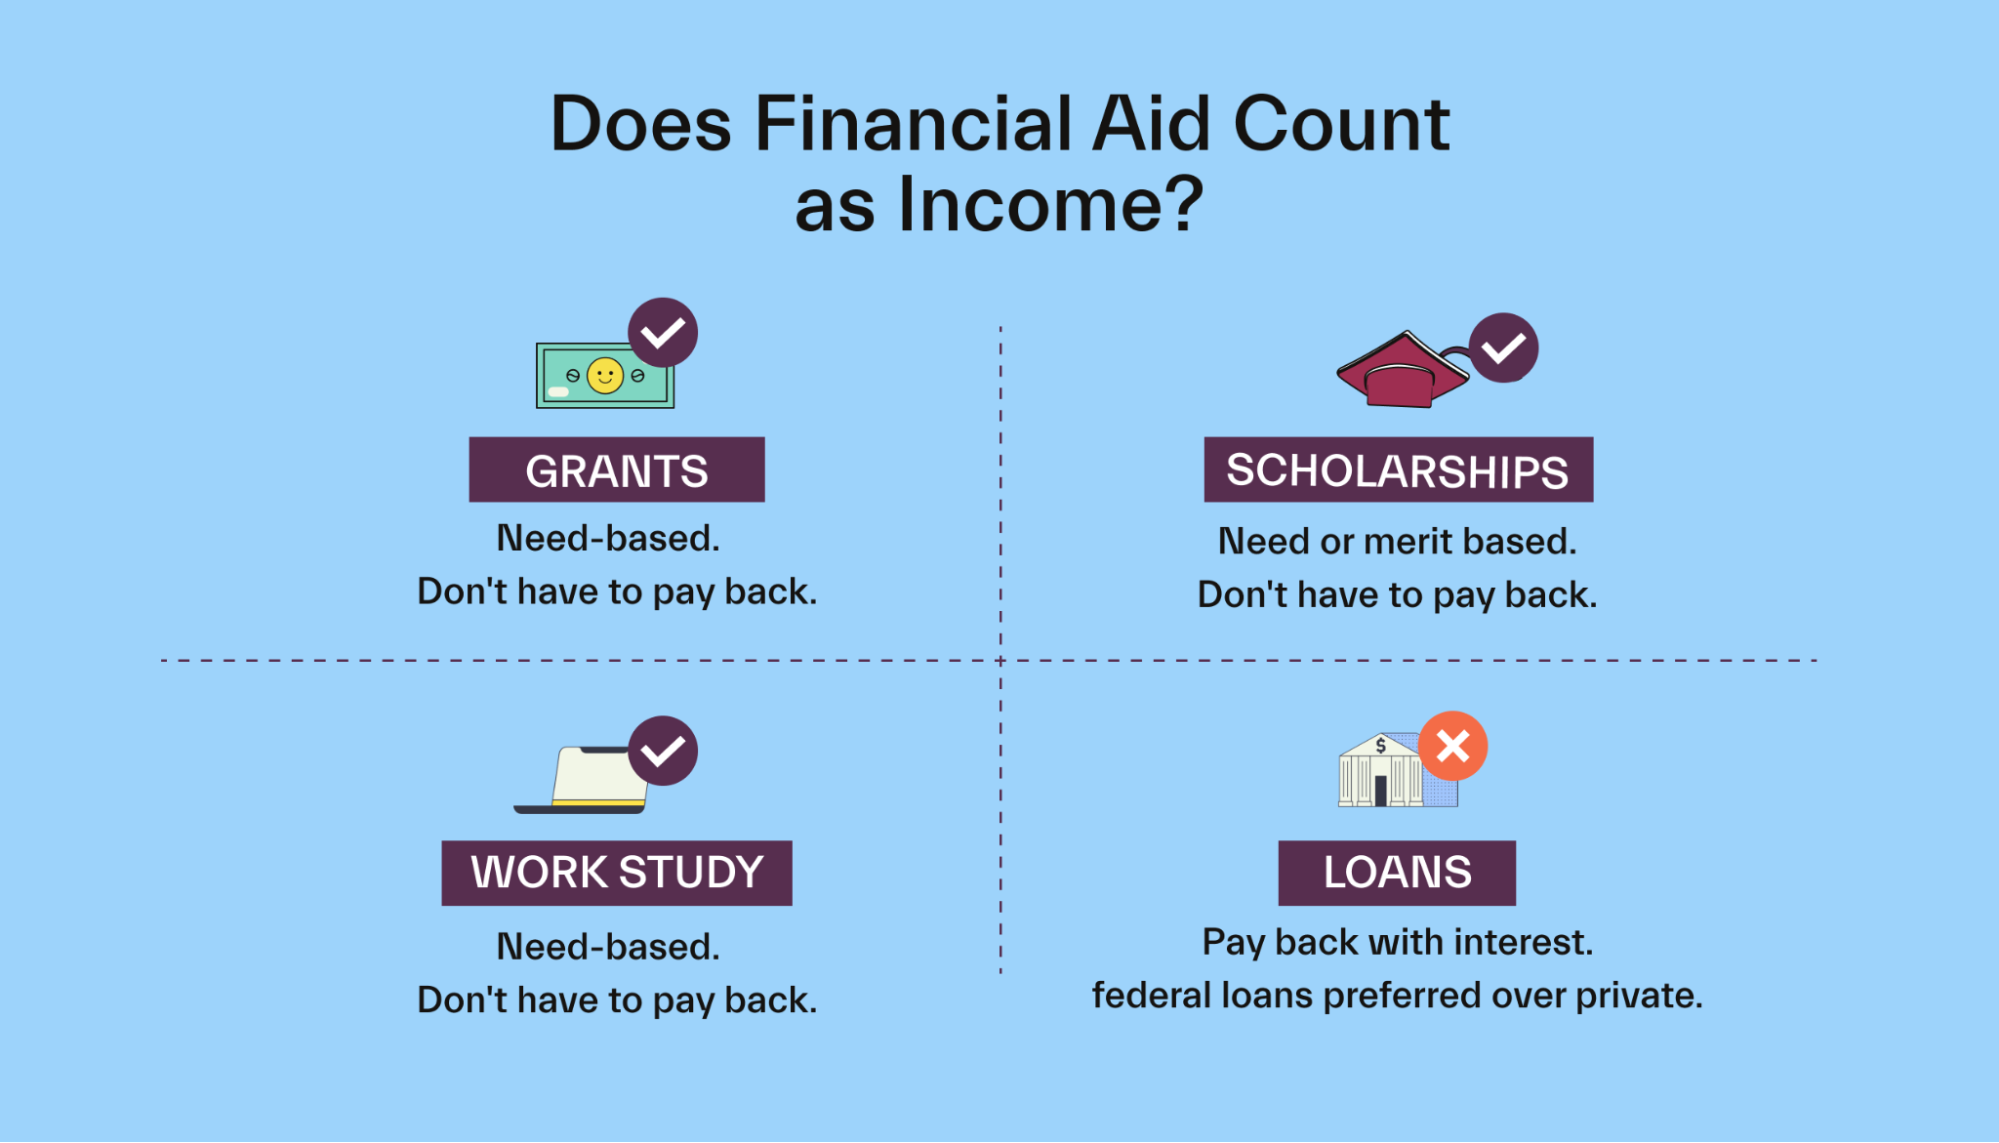 Does Financial Aid Count as Income?